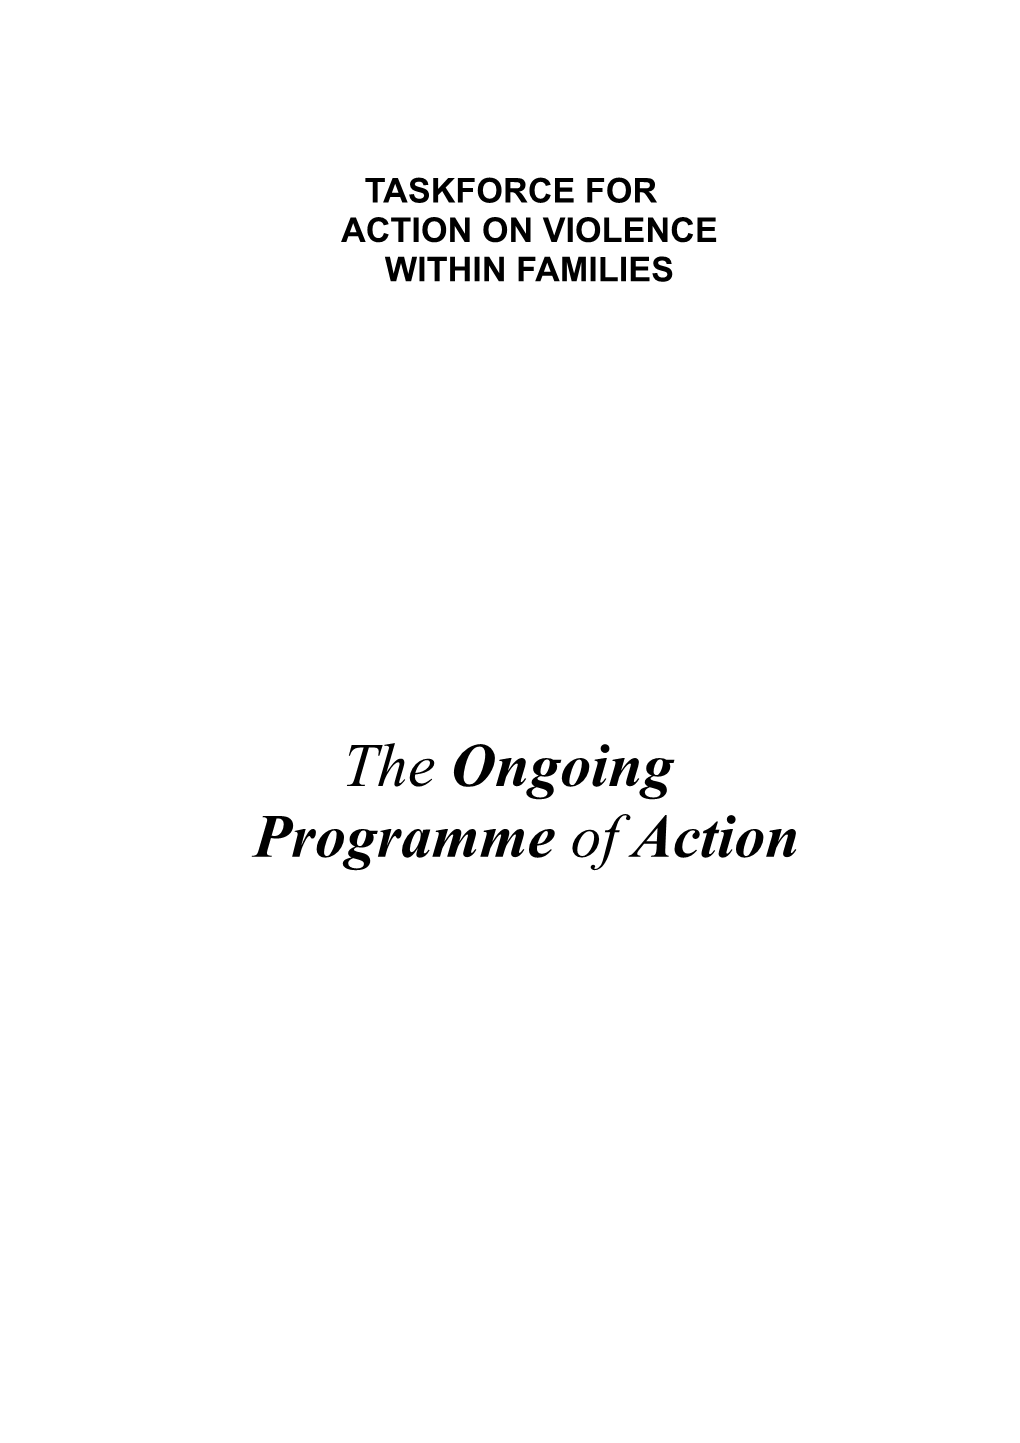 Taskforce Foraction on Violencewithin Families